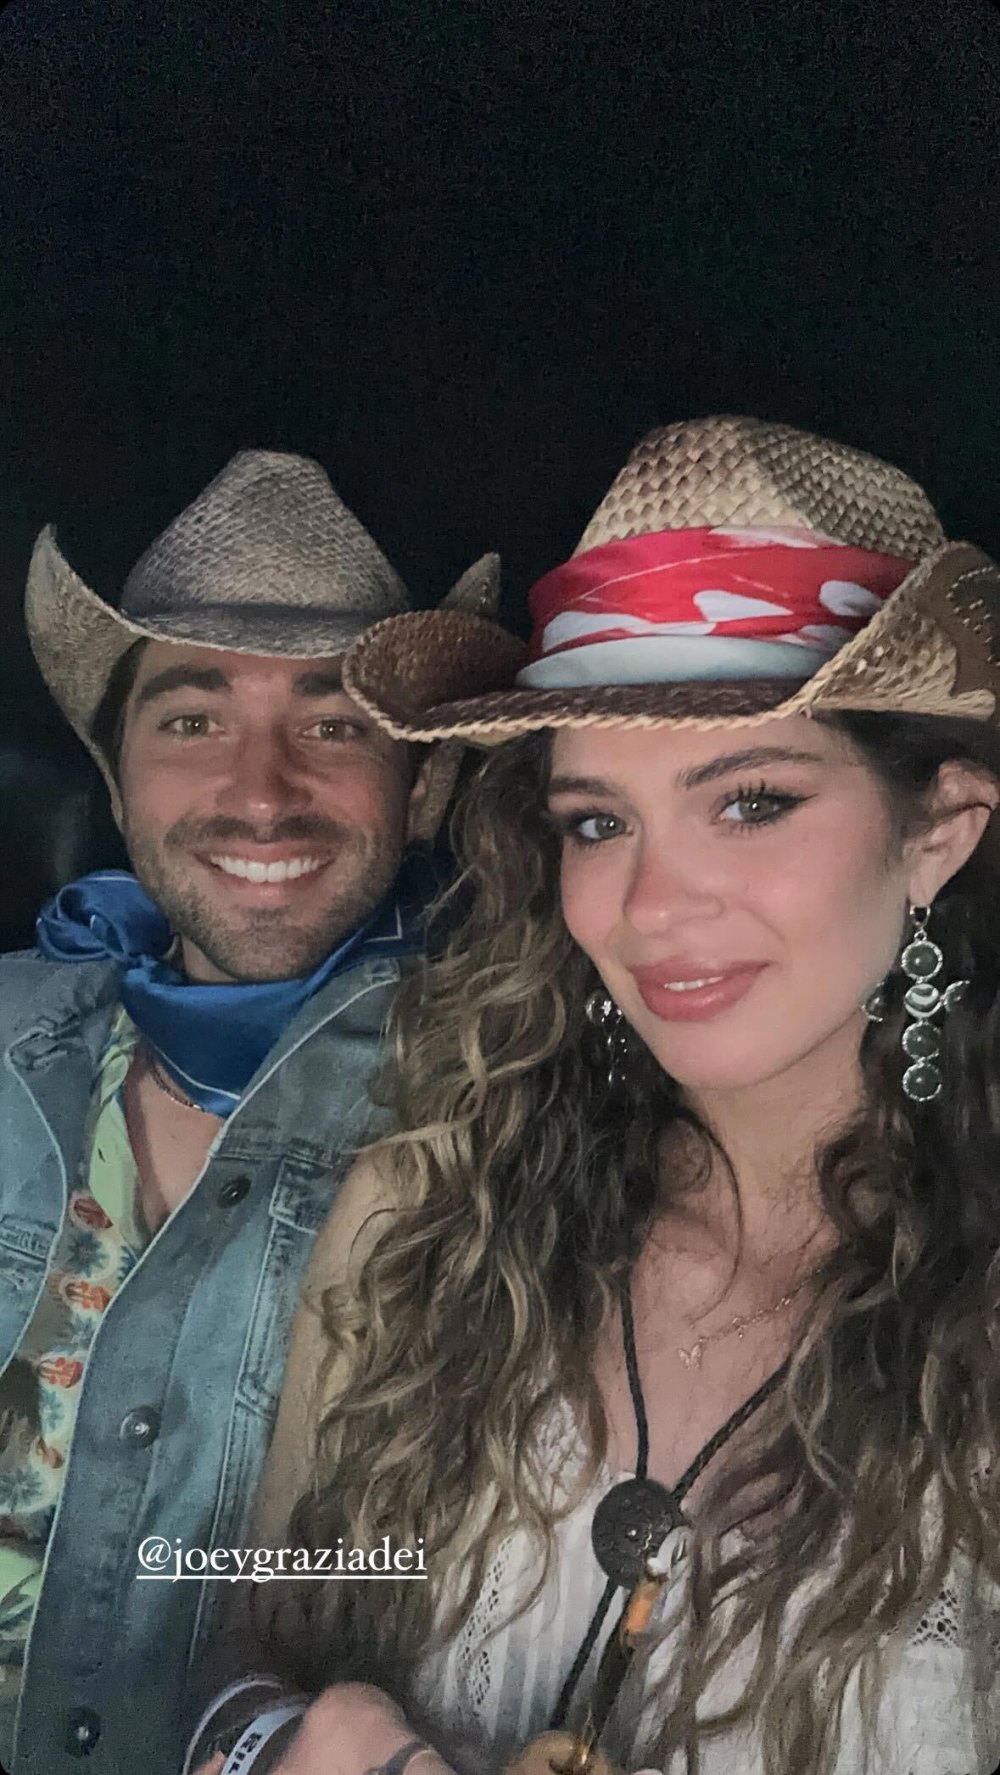 Bachelors Joey Graziadei and Kelsey Anderson meet Maria Georgas at Stagecoach